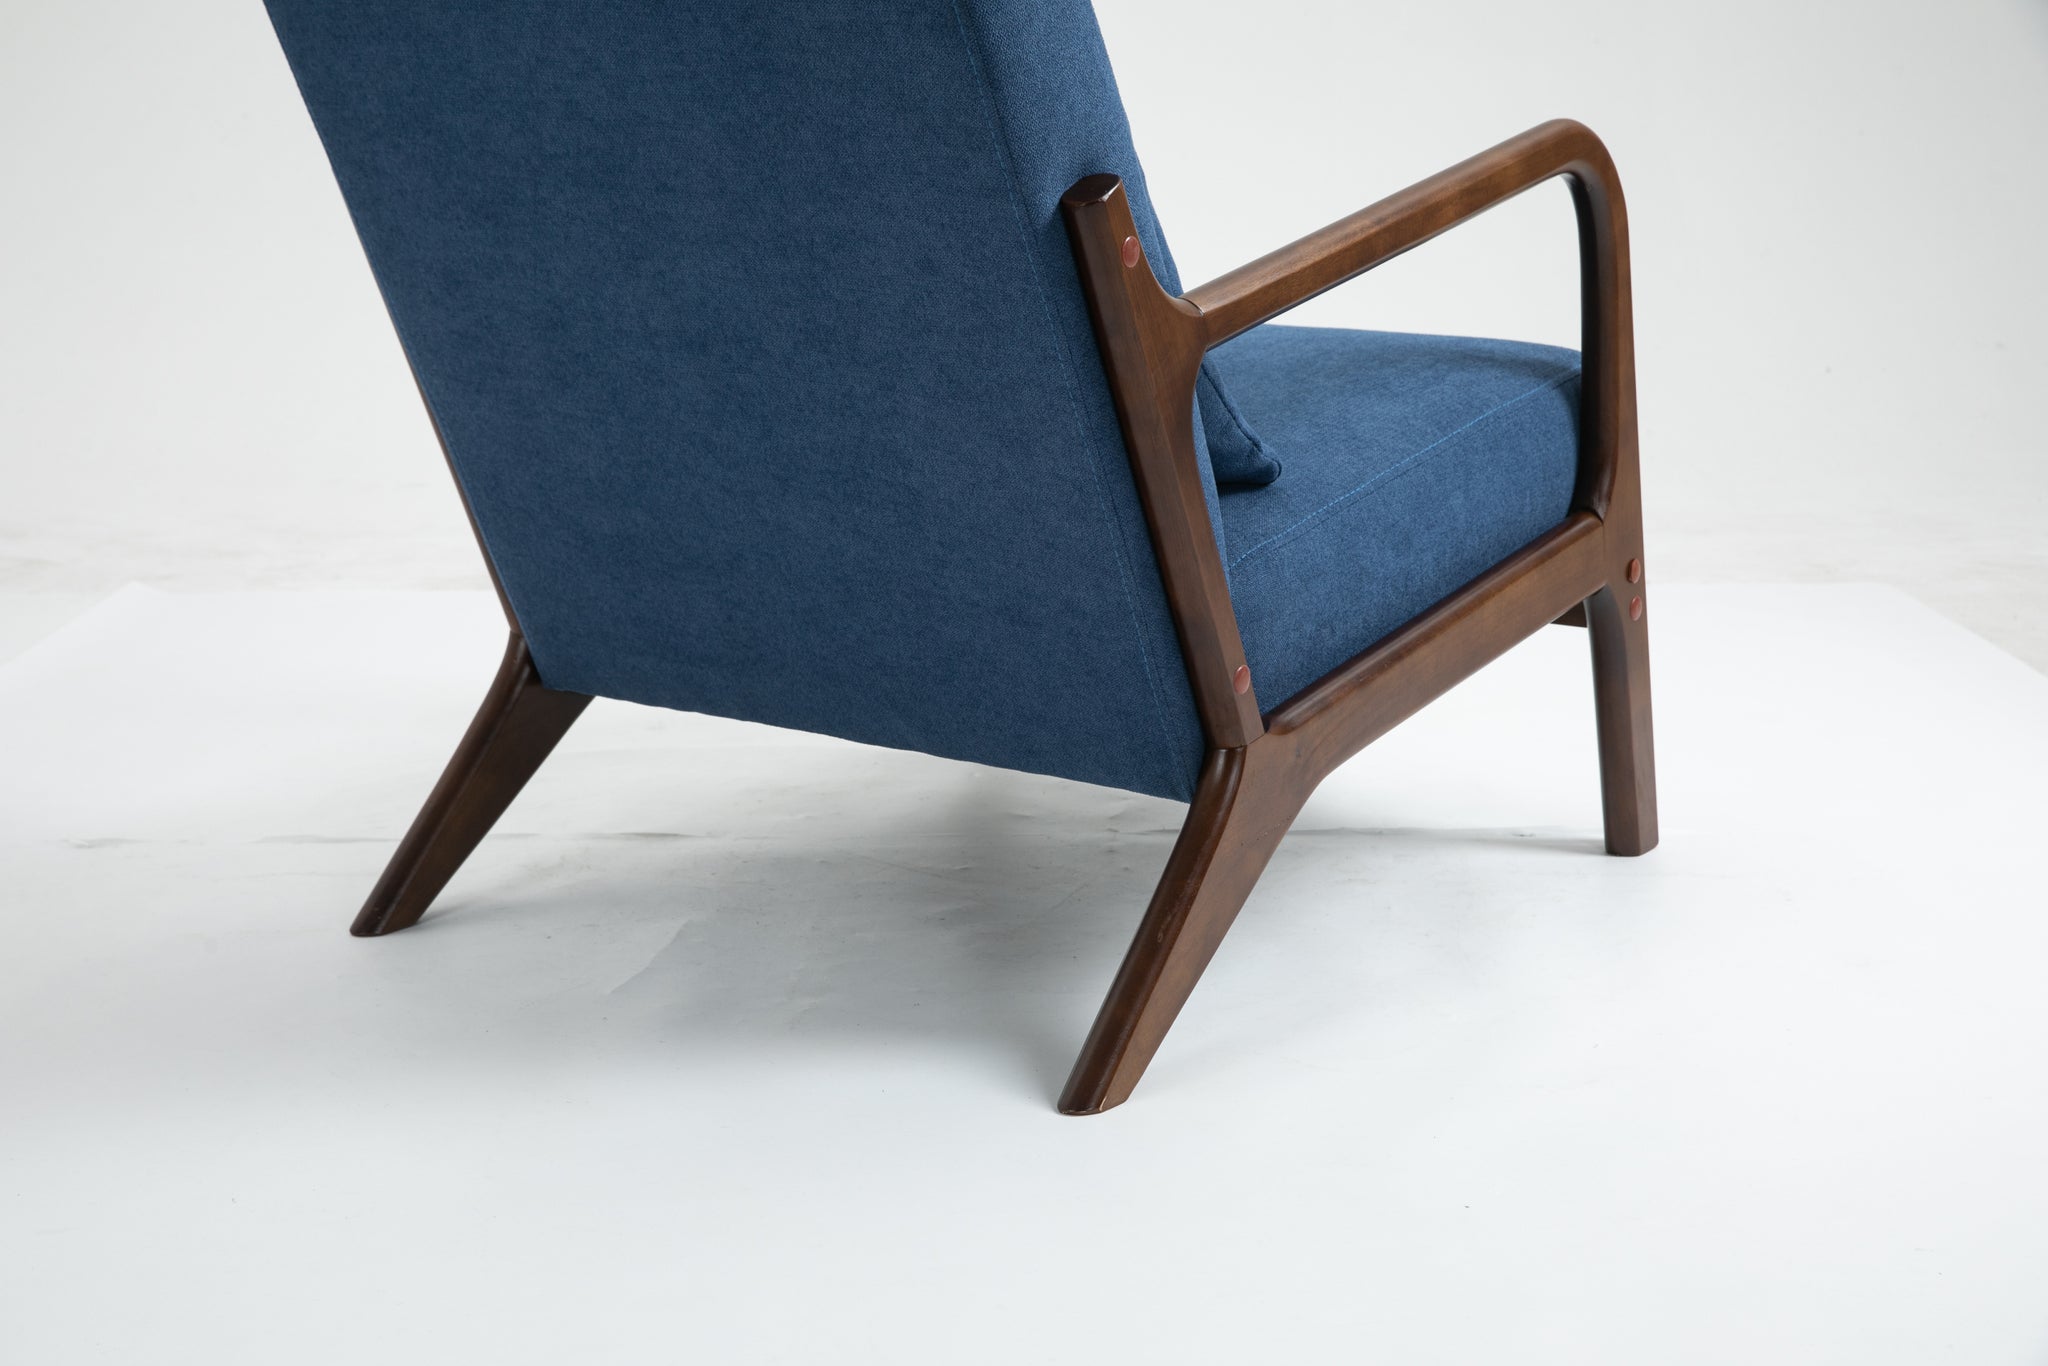 Mid Century Modern Accent Chair with Wood Frame blue-cotton-velvet